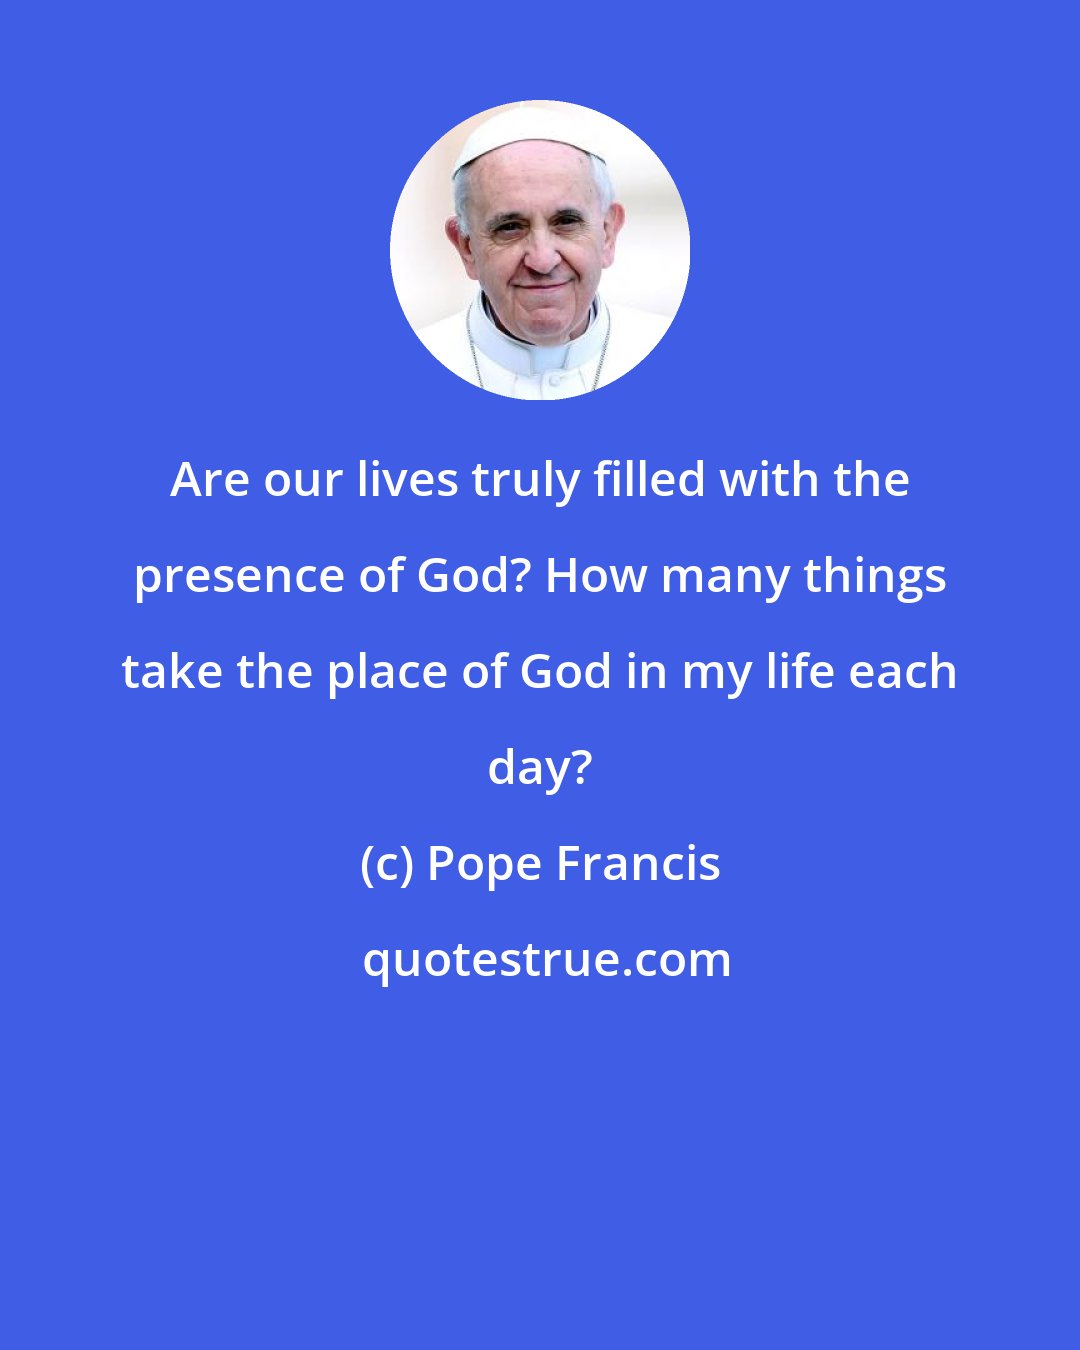 Pope Francis: Are our lives truly filled with the presence of God? How many things take the place of God in my life each day?